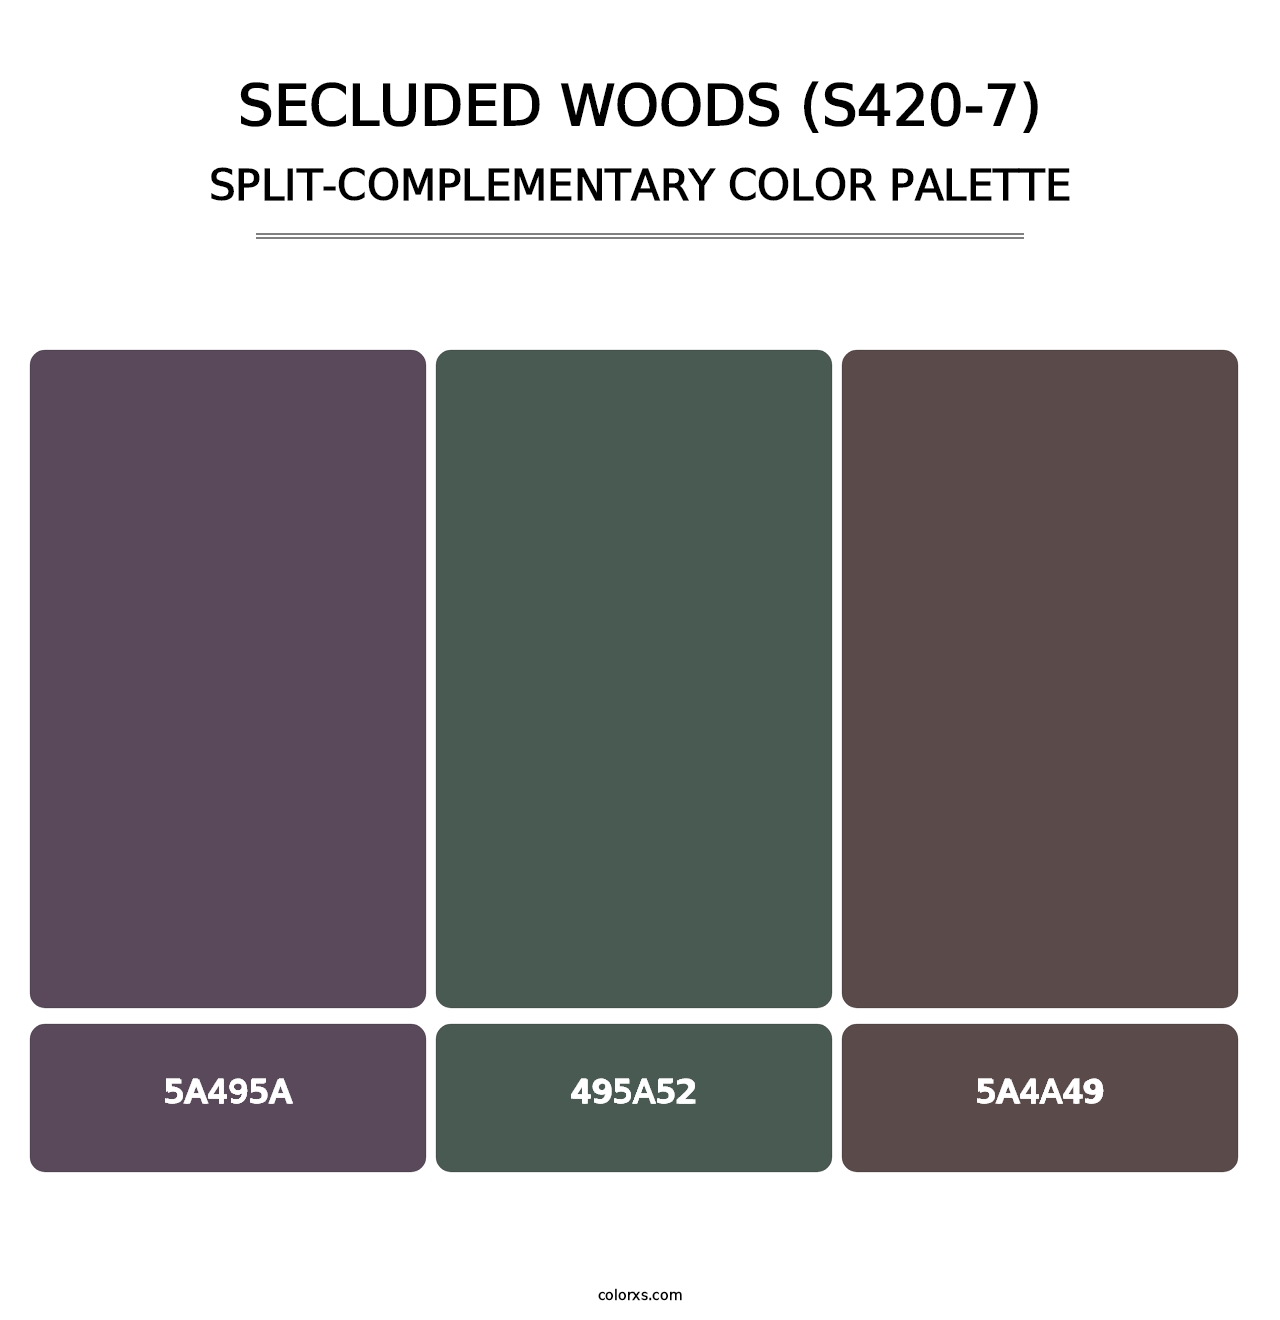 Secluded Woods (S420-7) - Split-Complementary Color Palette